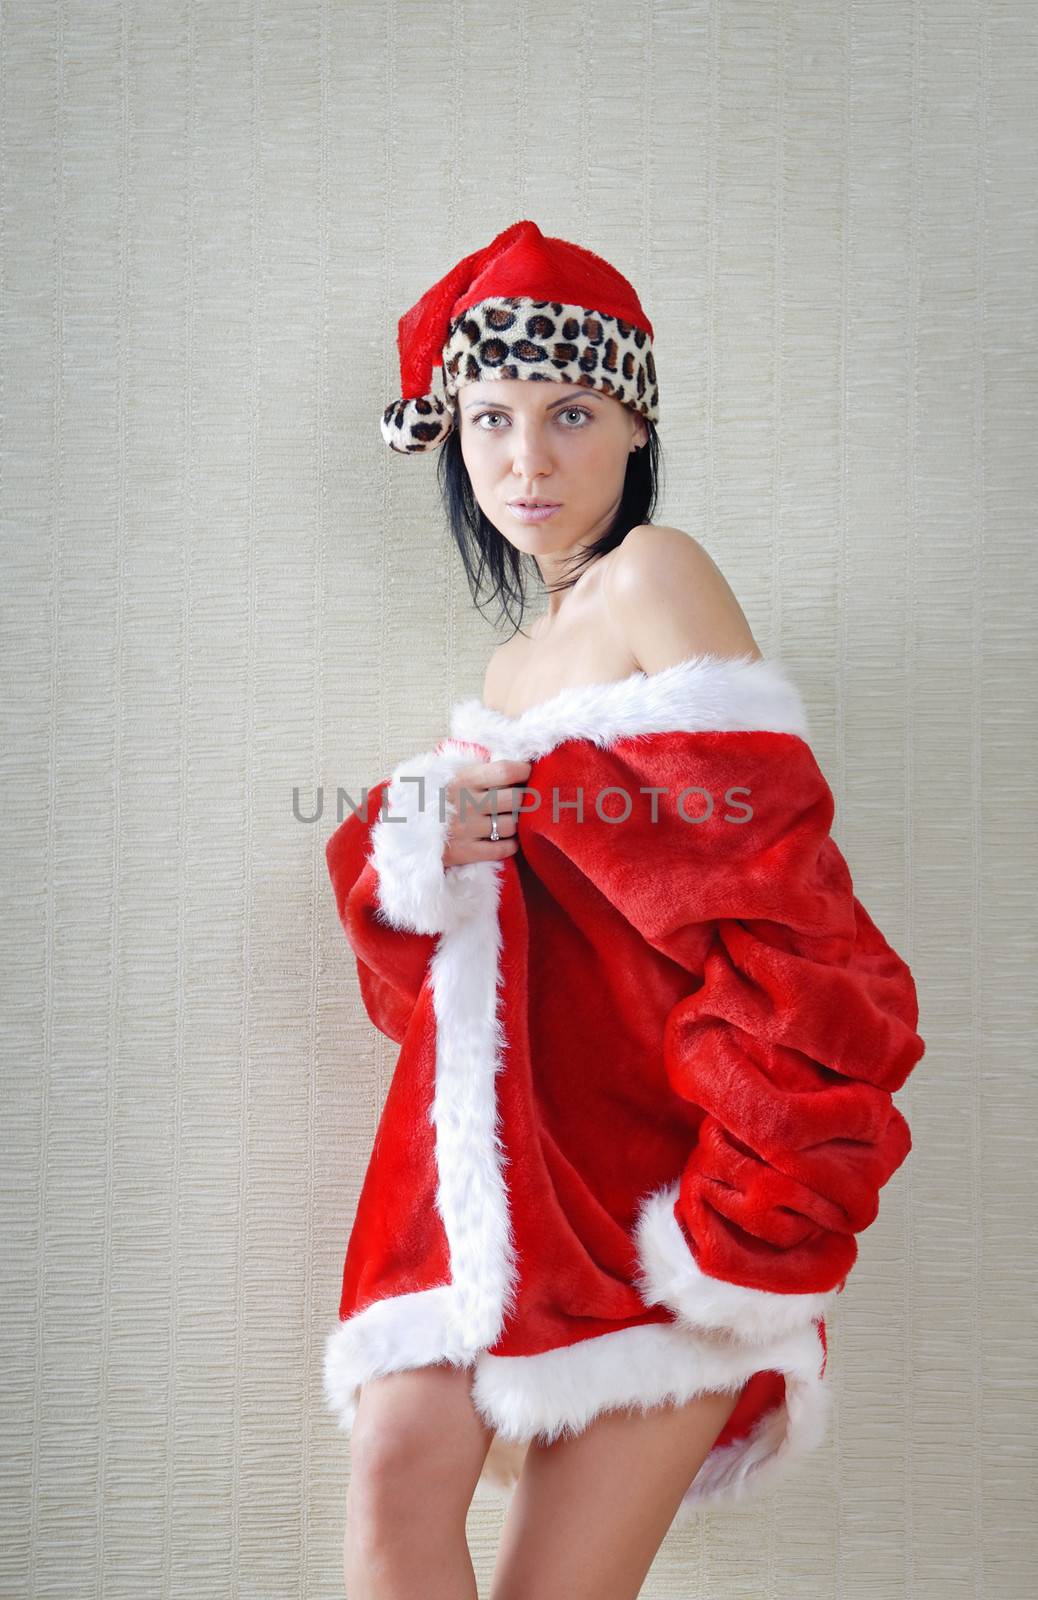 Glamour photo of the sexy lady in the red Santa costume